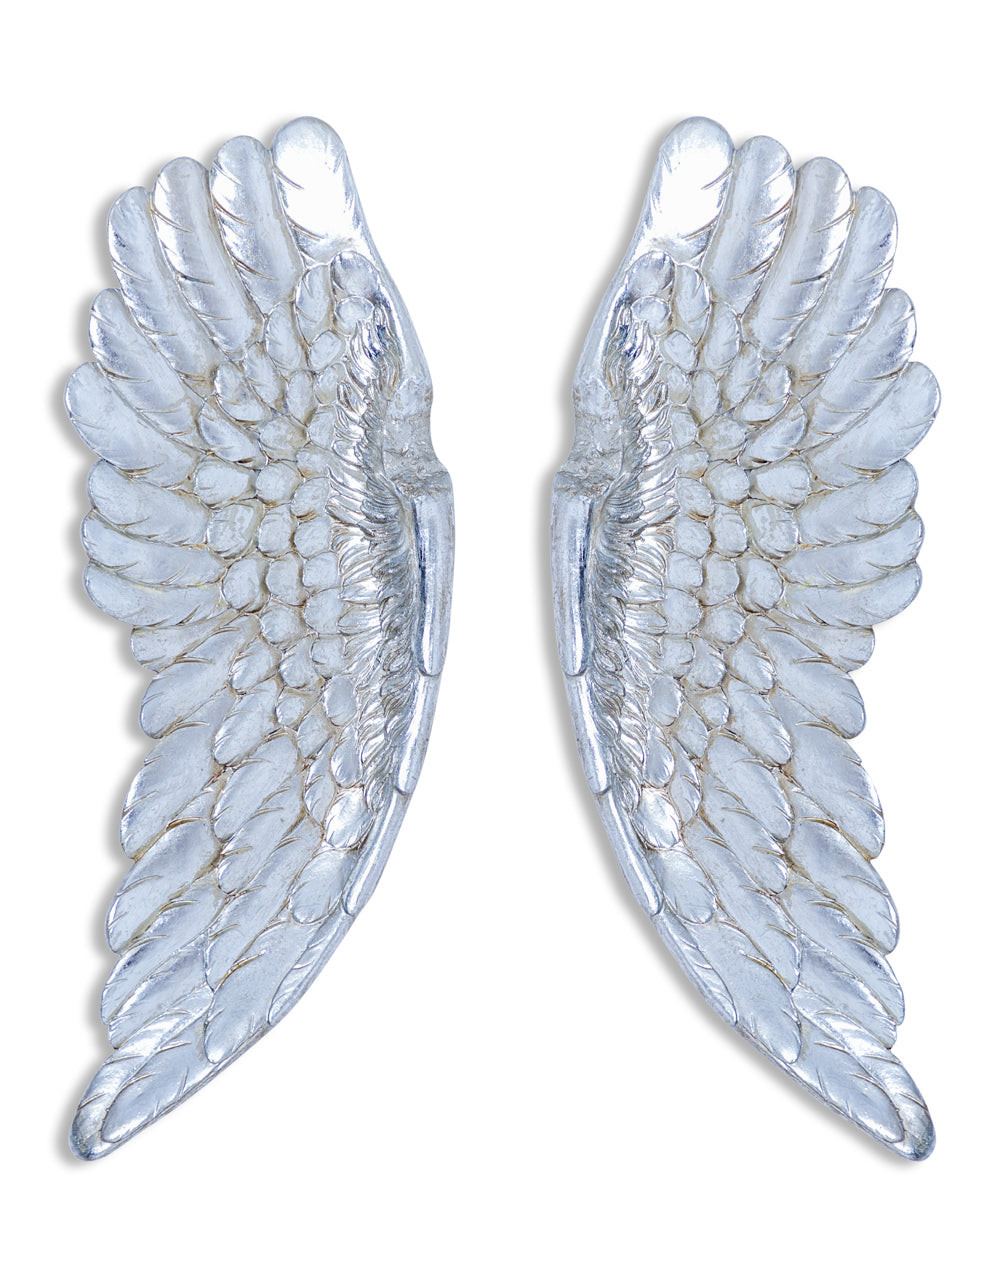 Pair of Antique Silver Wall Hanging Angel Wings